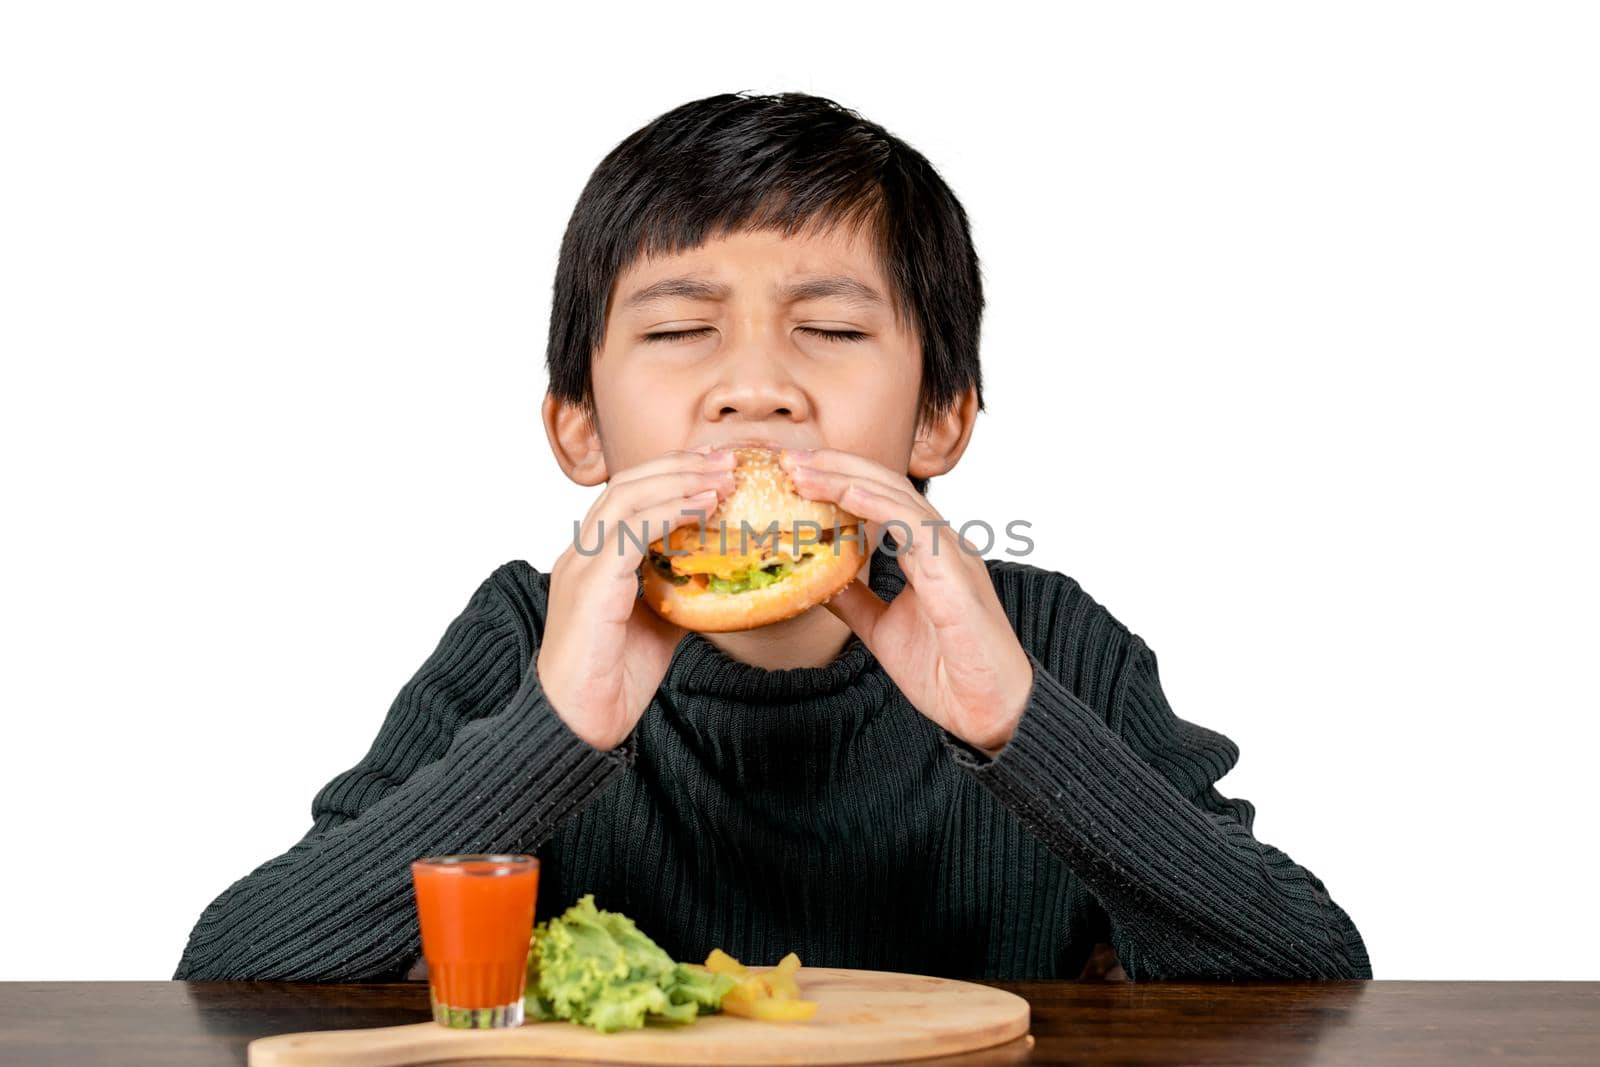 Cute Asian boy in black shirt eating a delicious hamburger on white background.